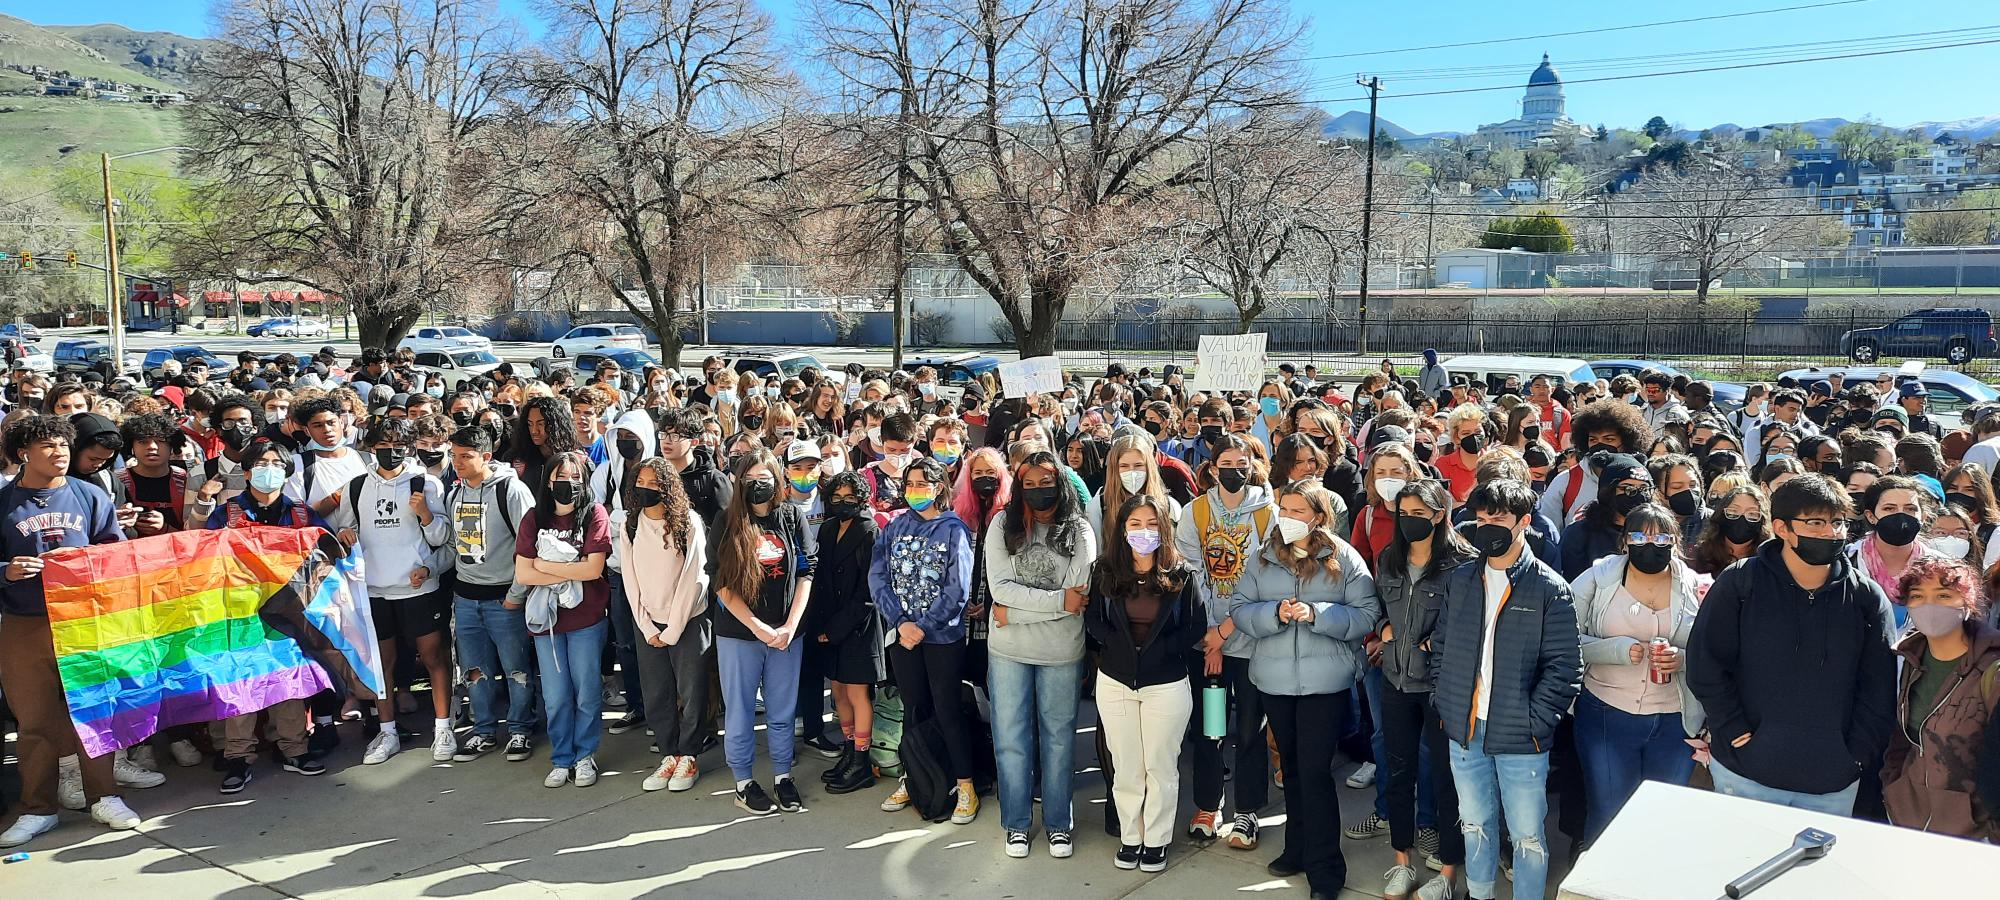 West High Students at their walkout. H.B. 11 Survey said over half of utahns approved....